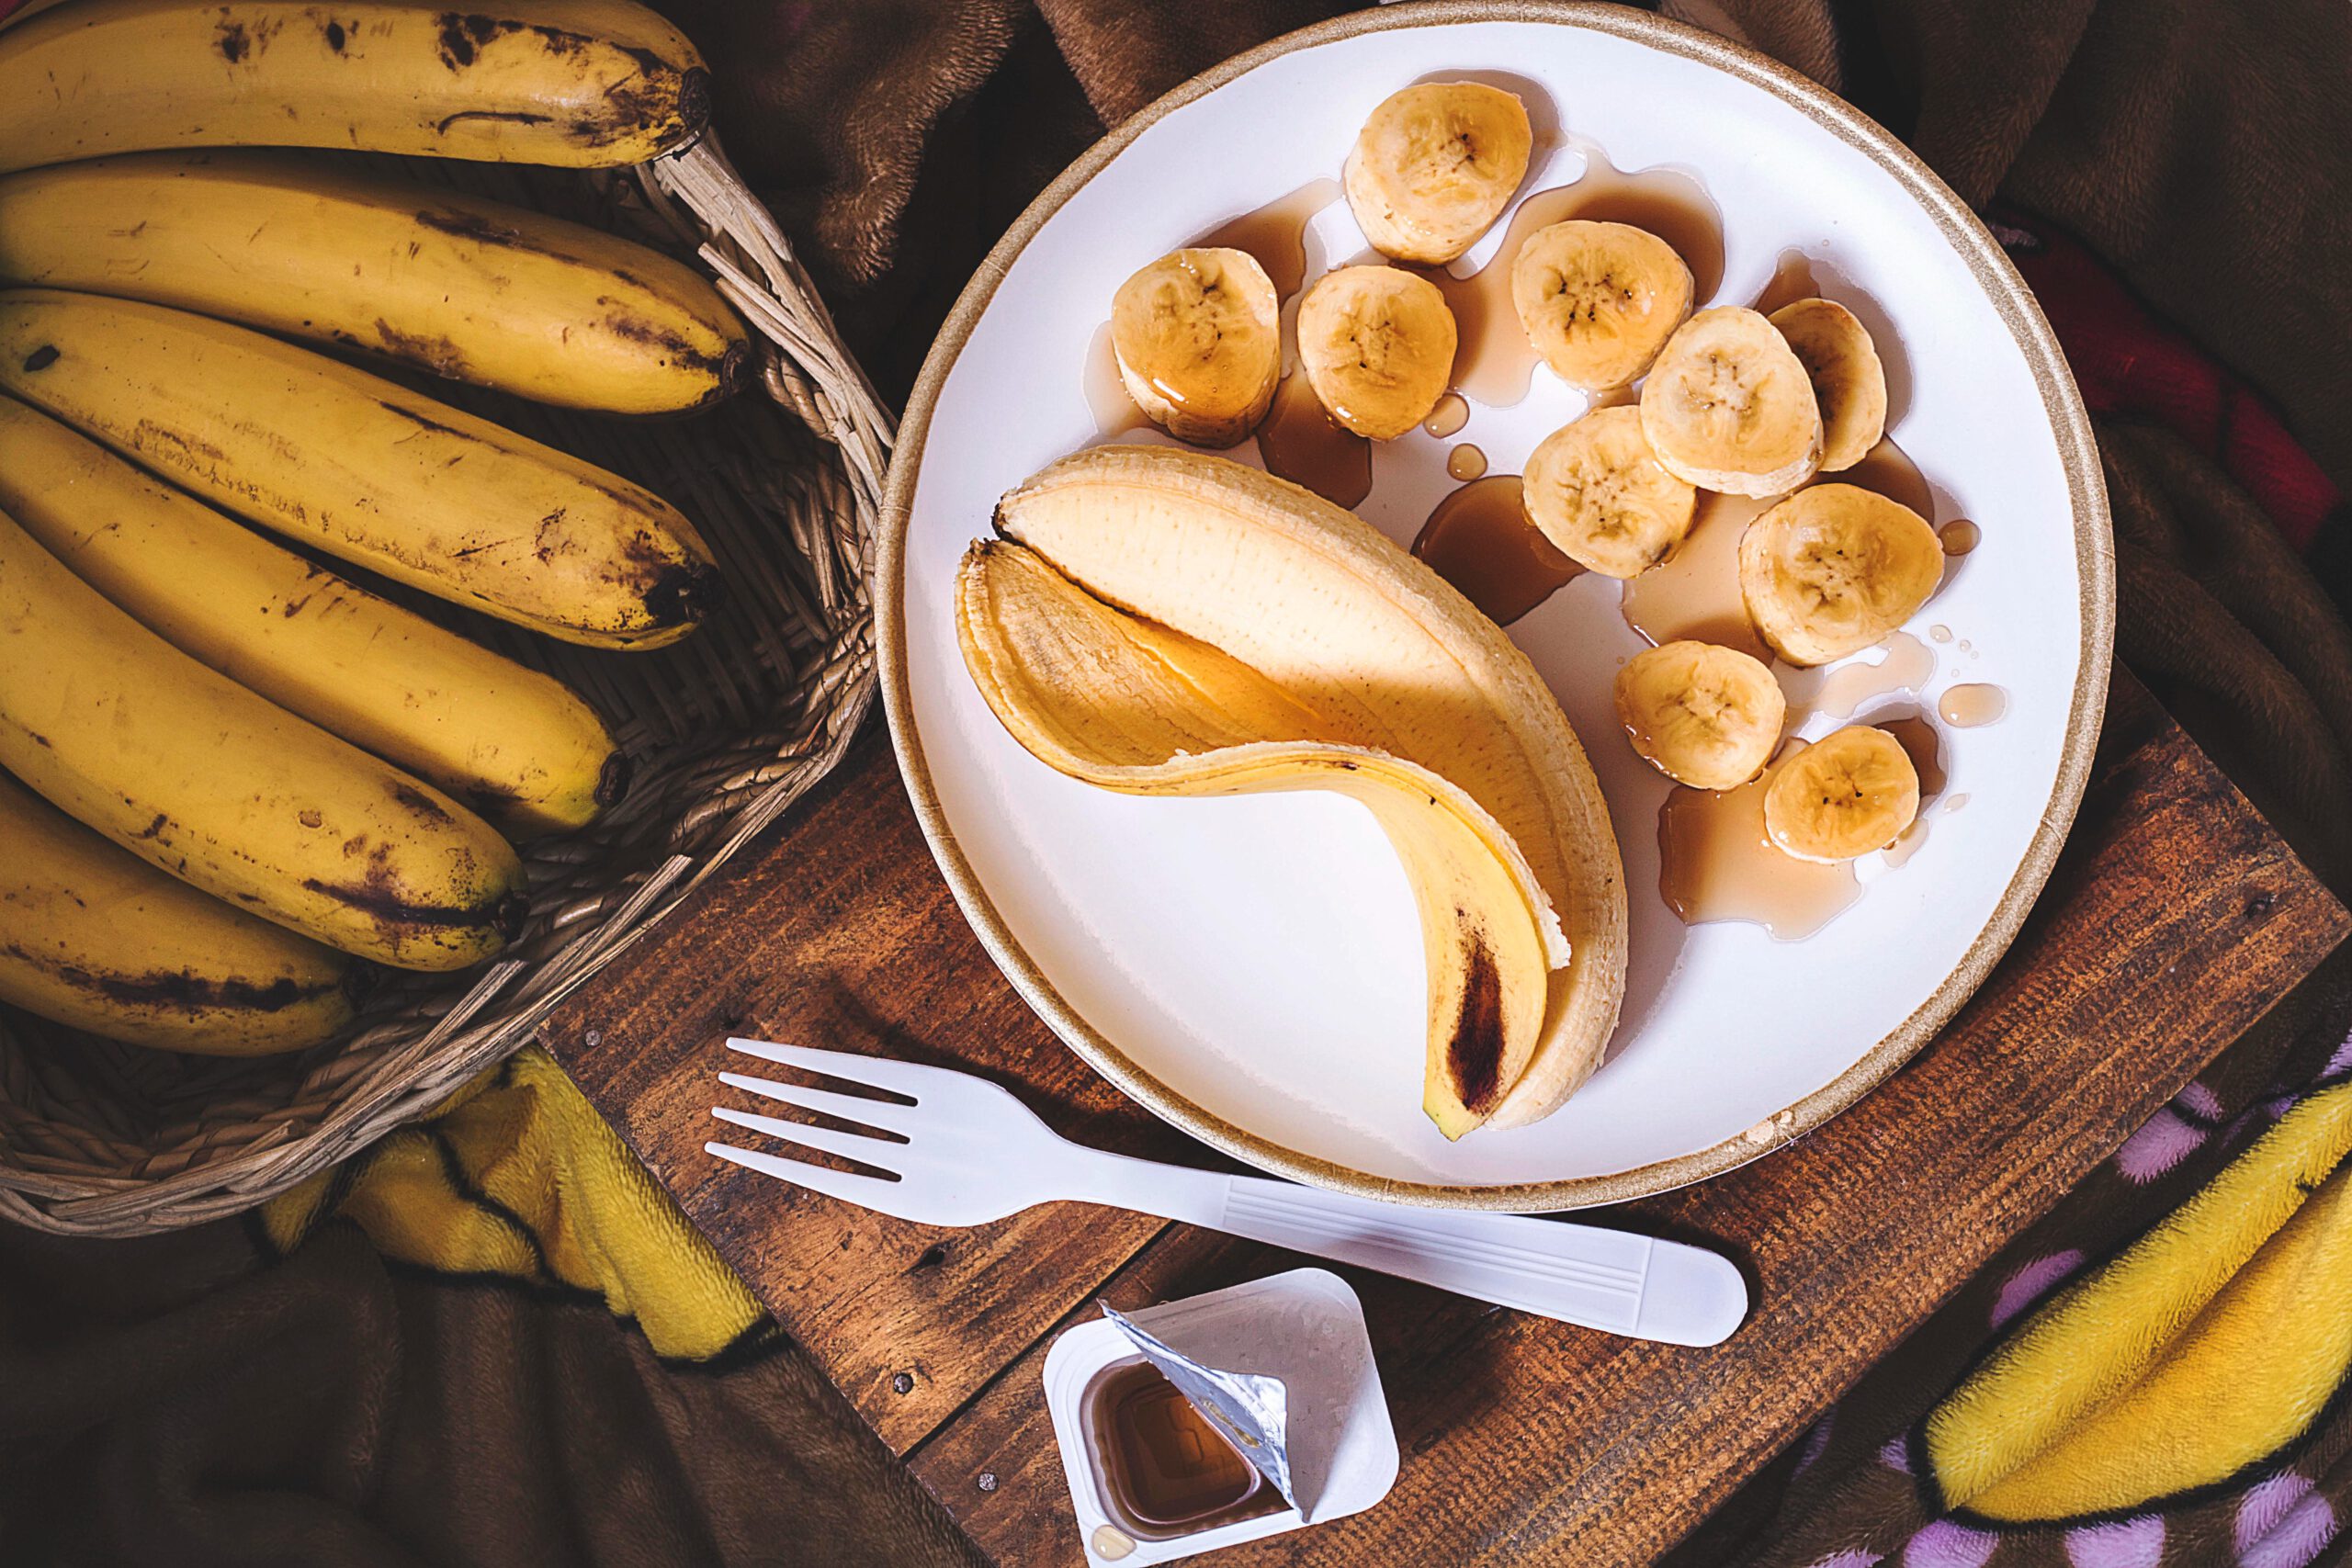 Do eating Bananas Improve Your Concentration?